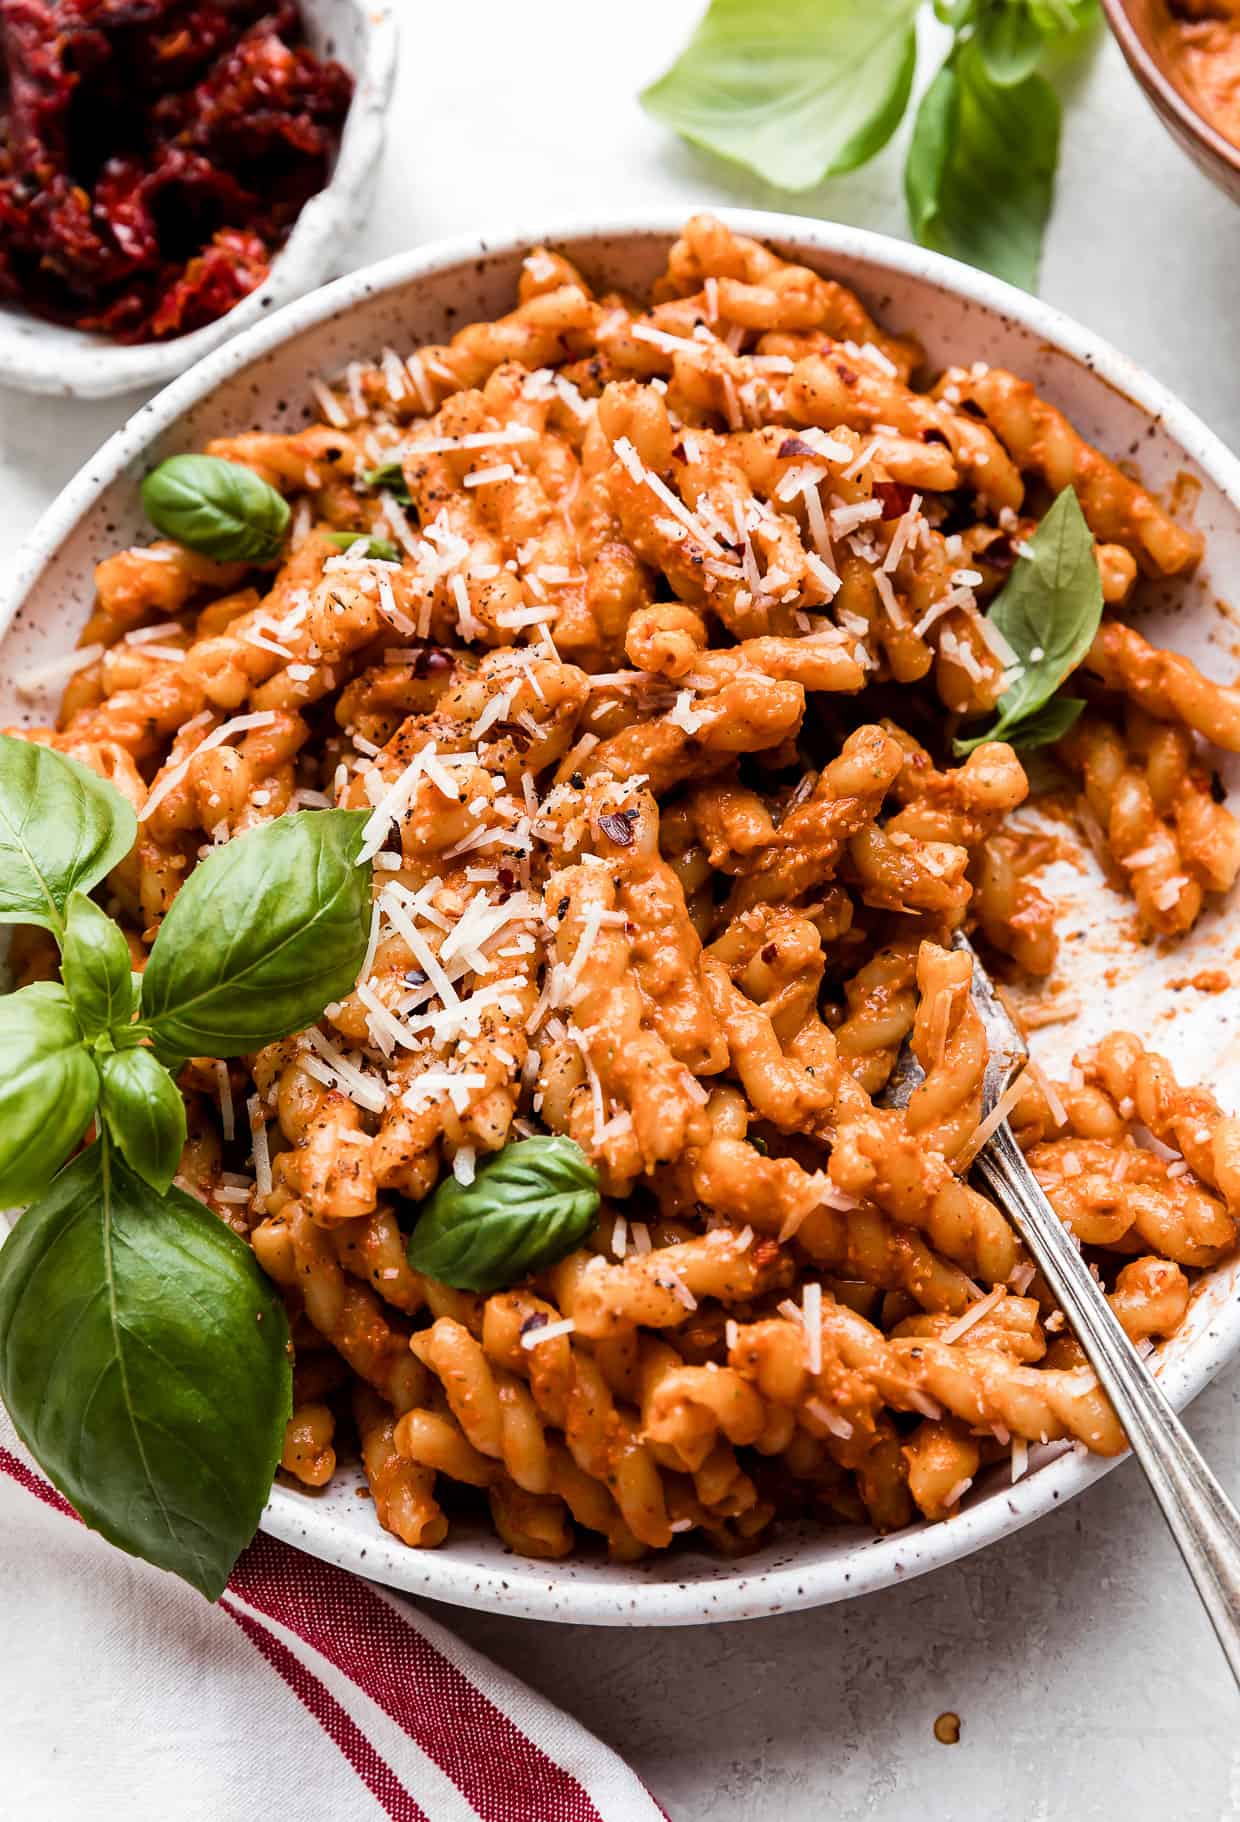 Red Pesto Pasta on a white plate with a fork scooping up noodles.